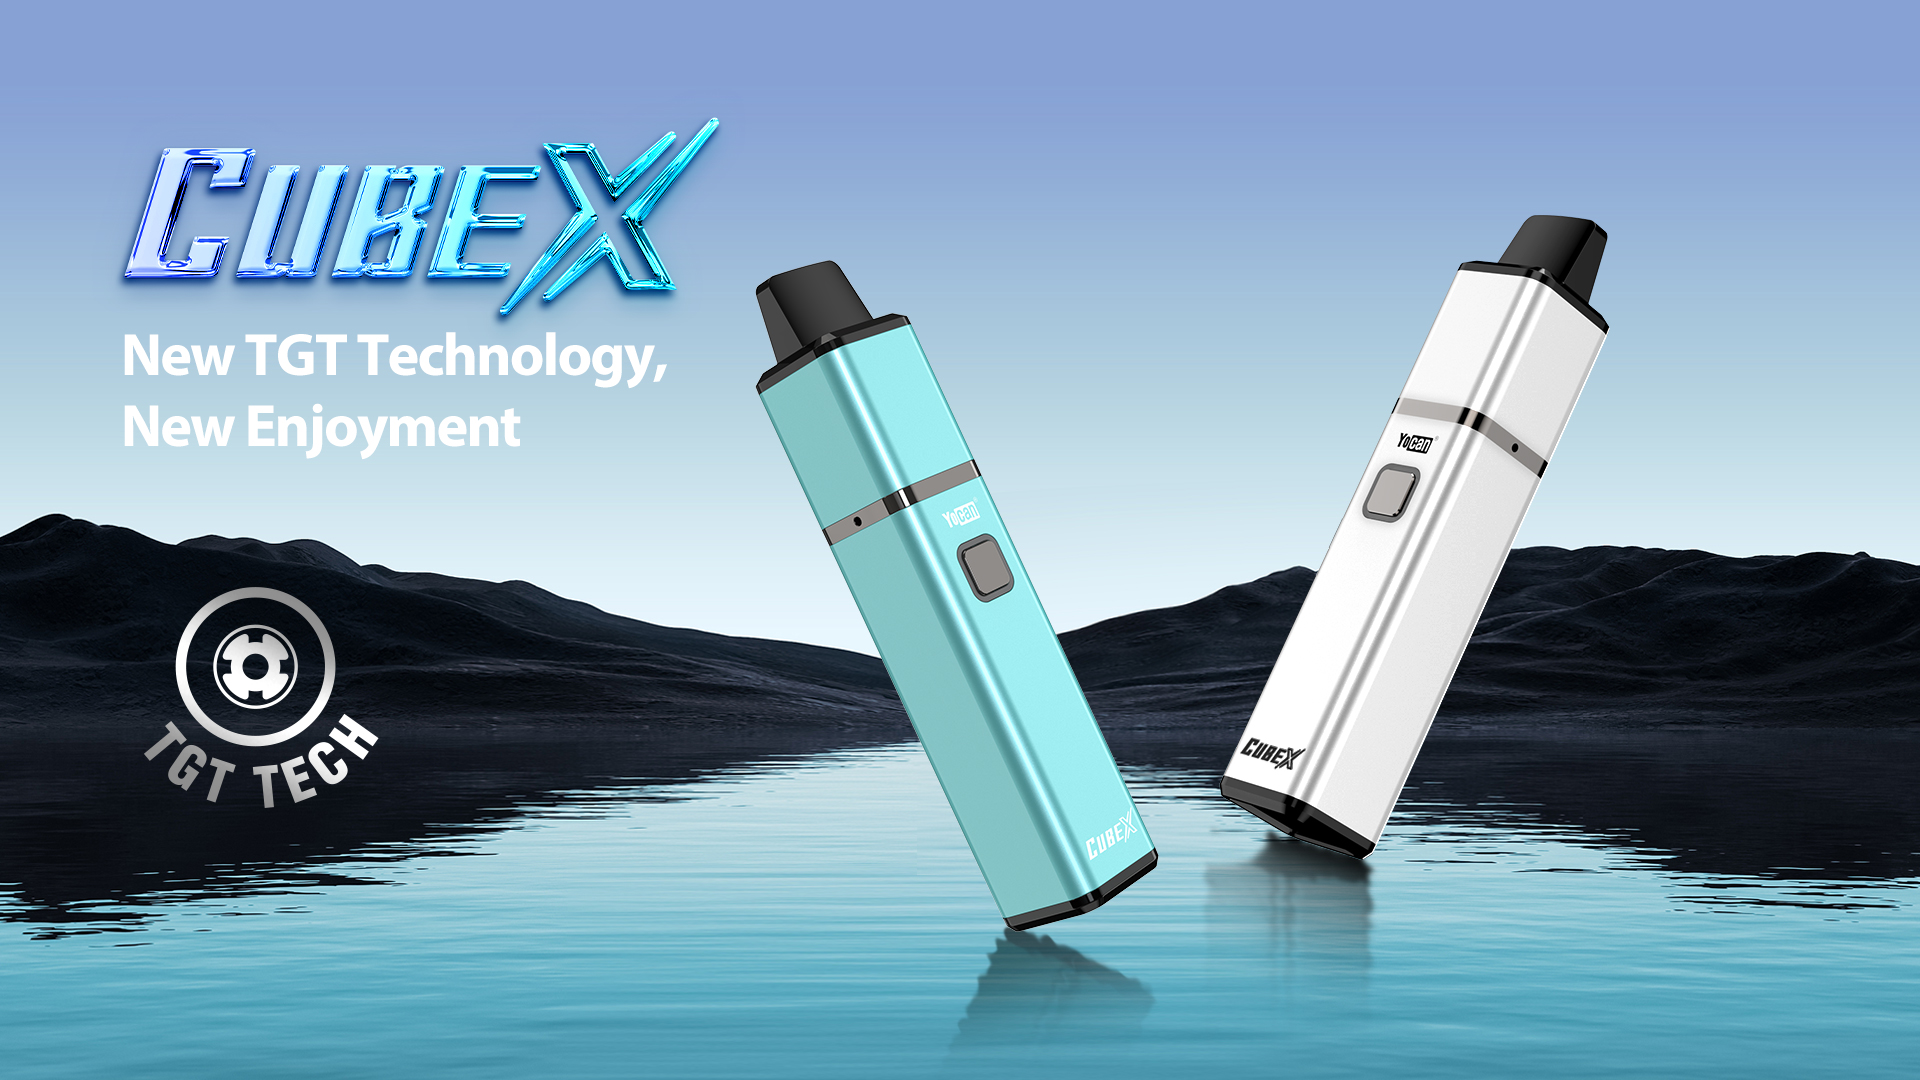 Yocan Cubex comes with New TGT Technology, New Enjoyment.